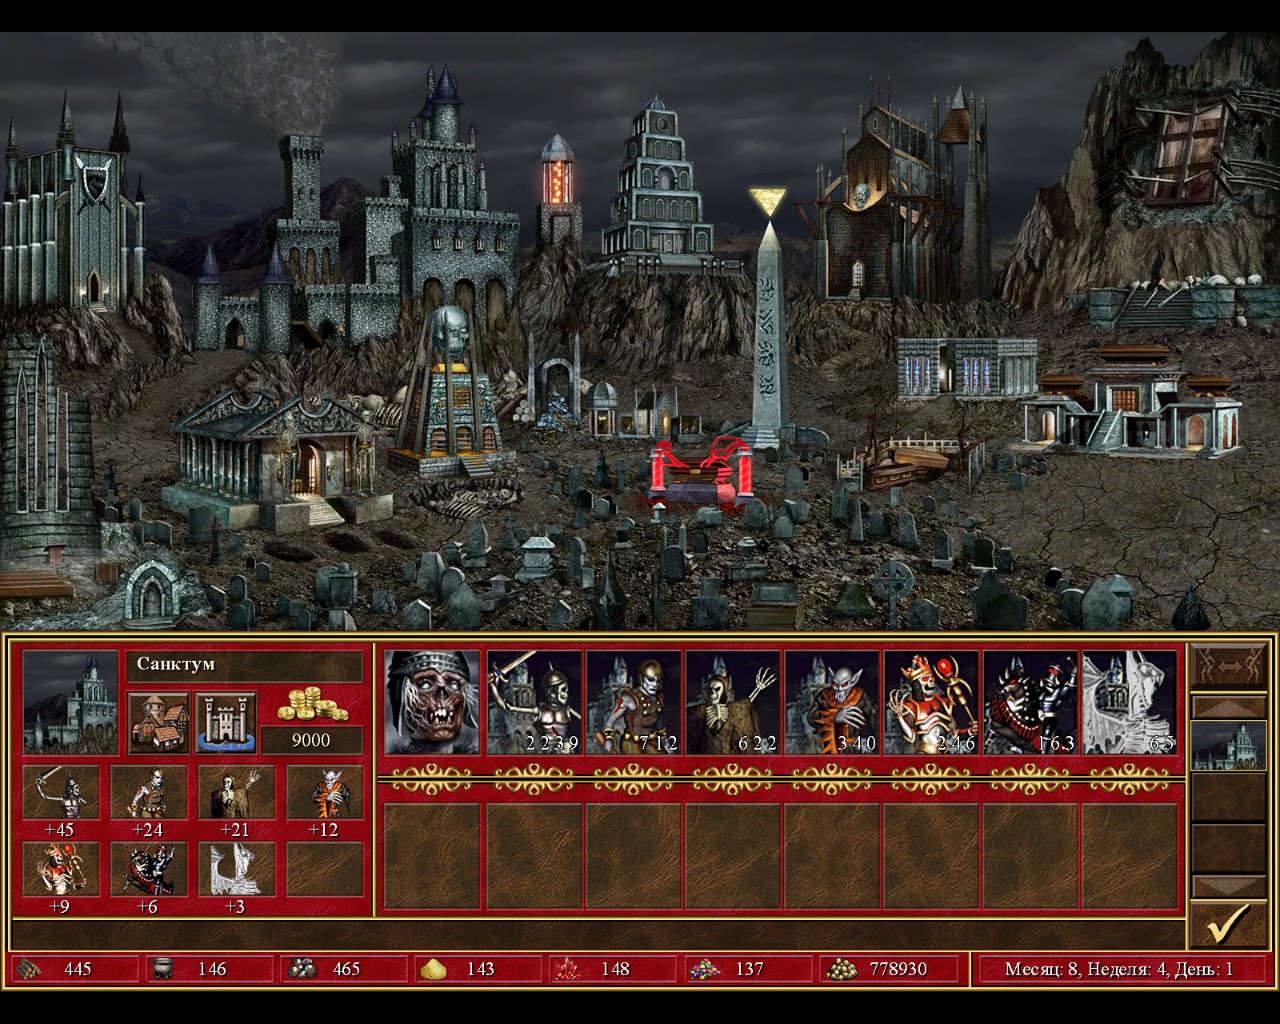 download heroes of might and magic iv